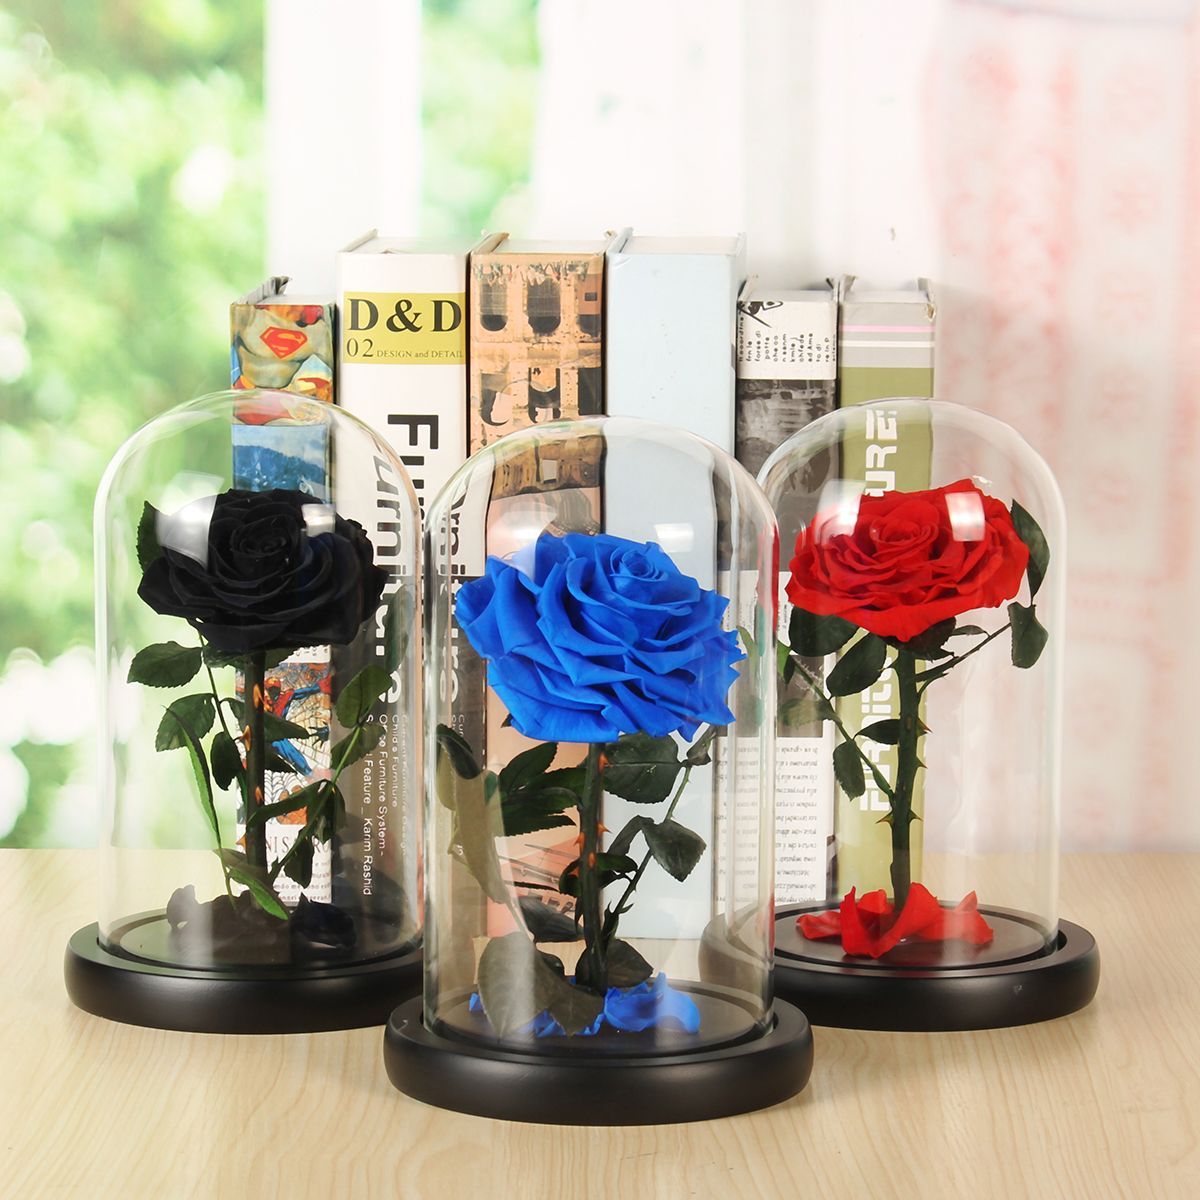 Forever-Rose-Beauty--The-Beast-Immortal-Fresh-Flower-Christmas-Unique-Gifts-Decorations-1640240